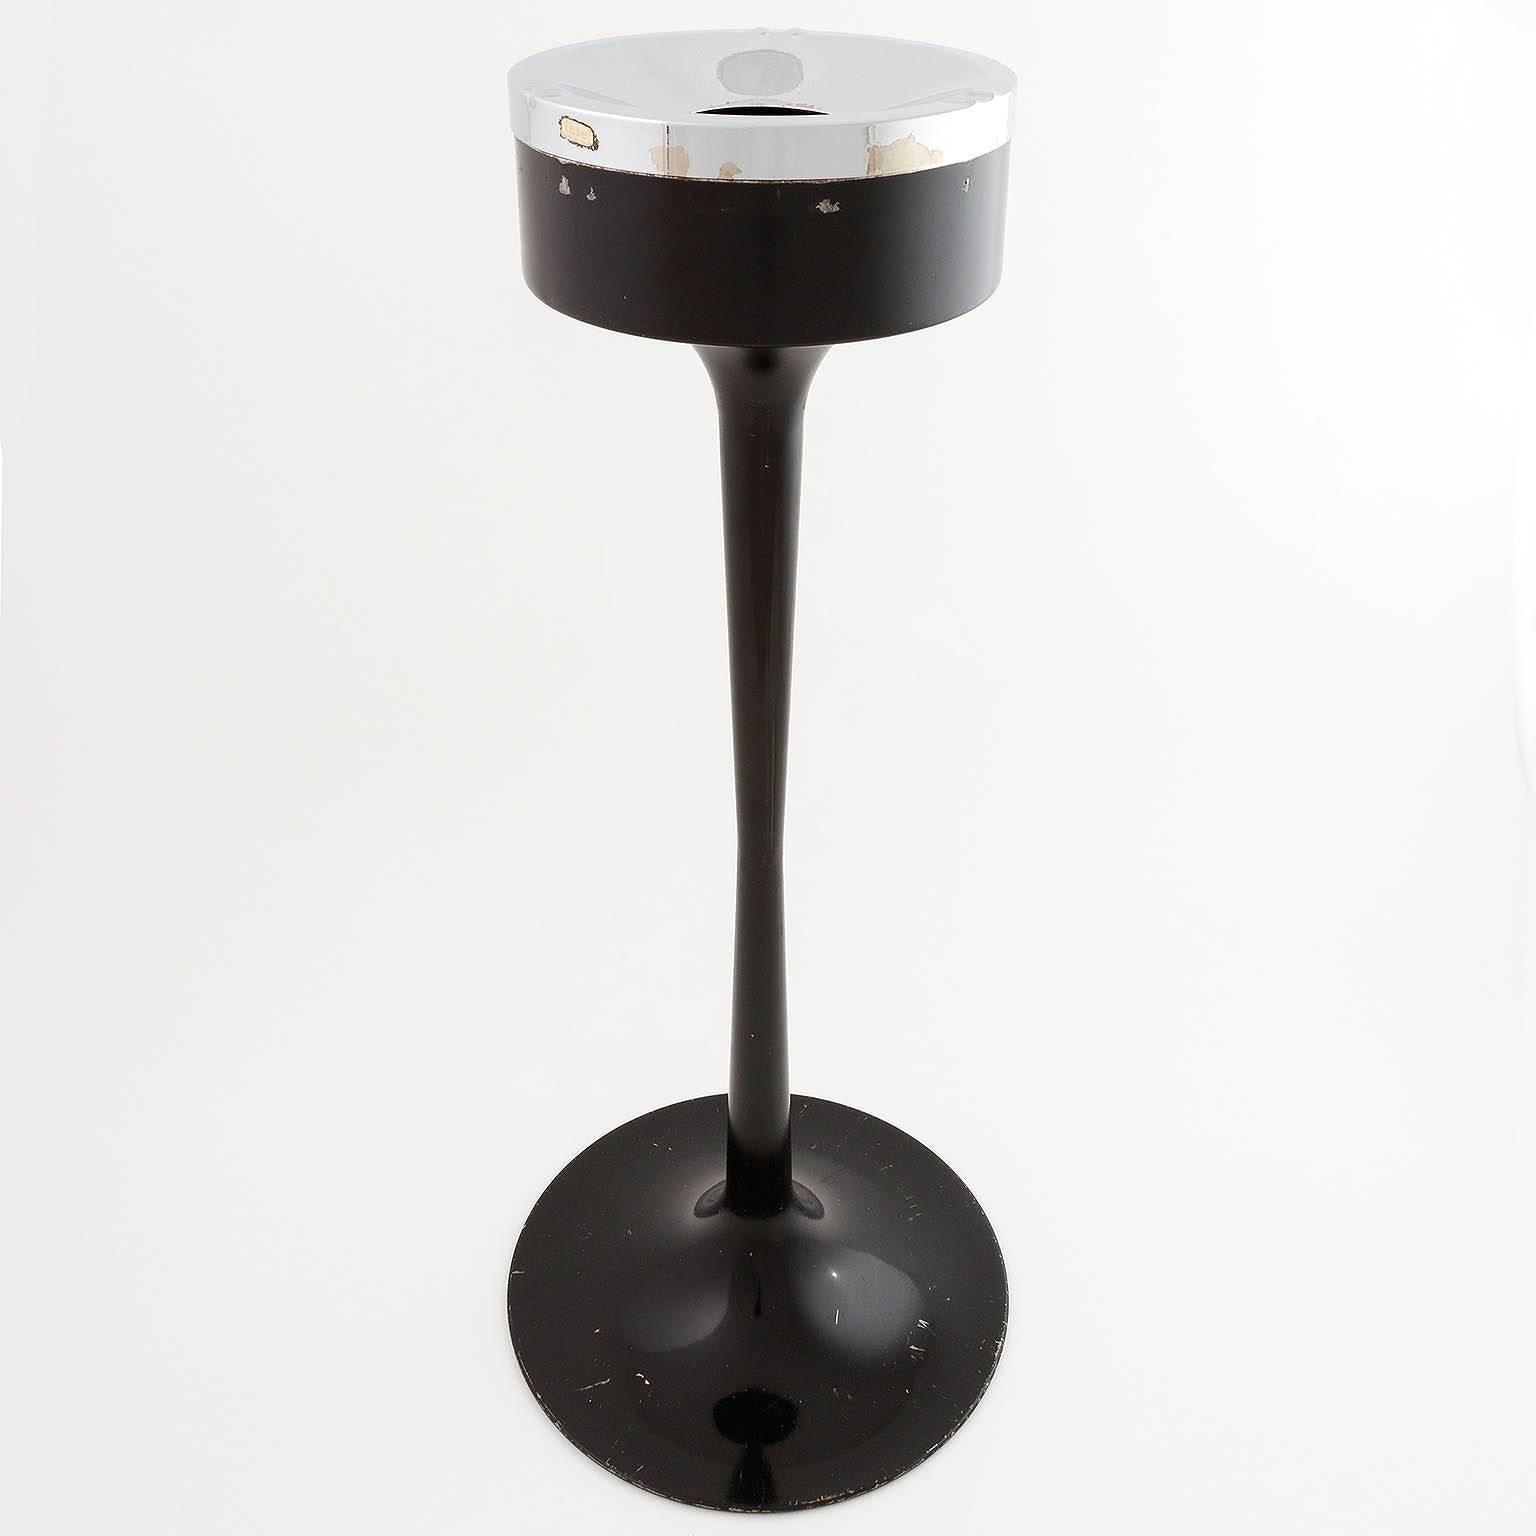 An ashtray with tulip base by Fase Madrid, Spain. Made of chrome and black lacquered metal. Wear on chrome and lacquer. Label is still available.